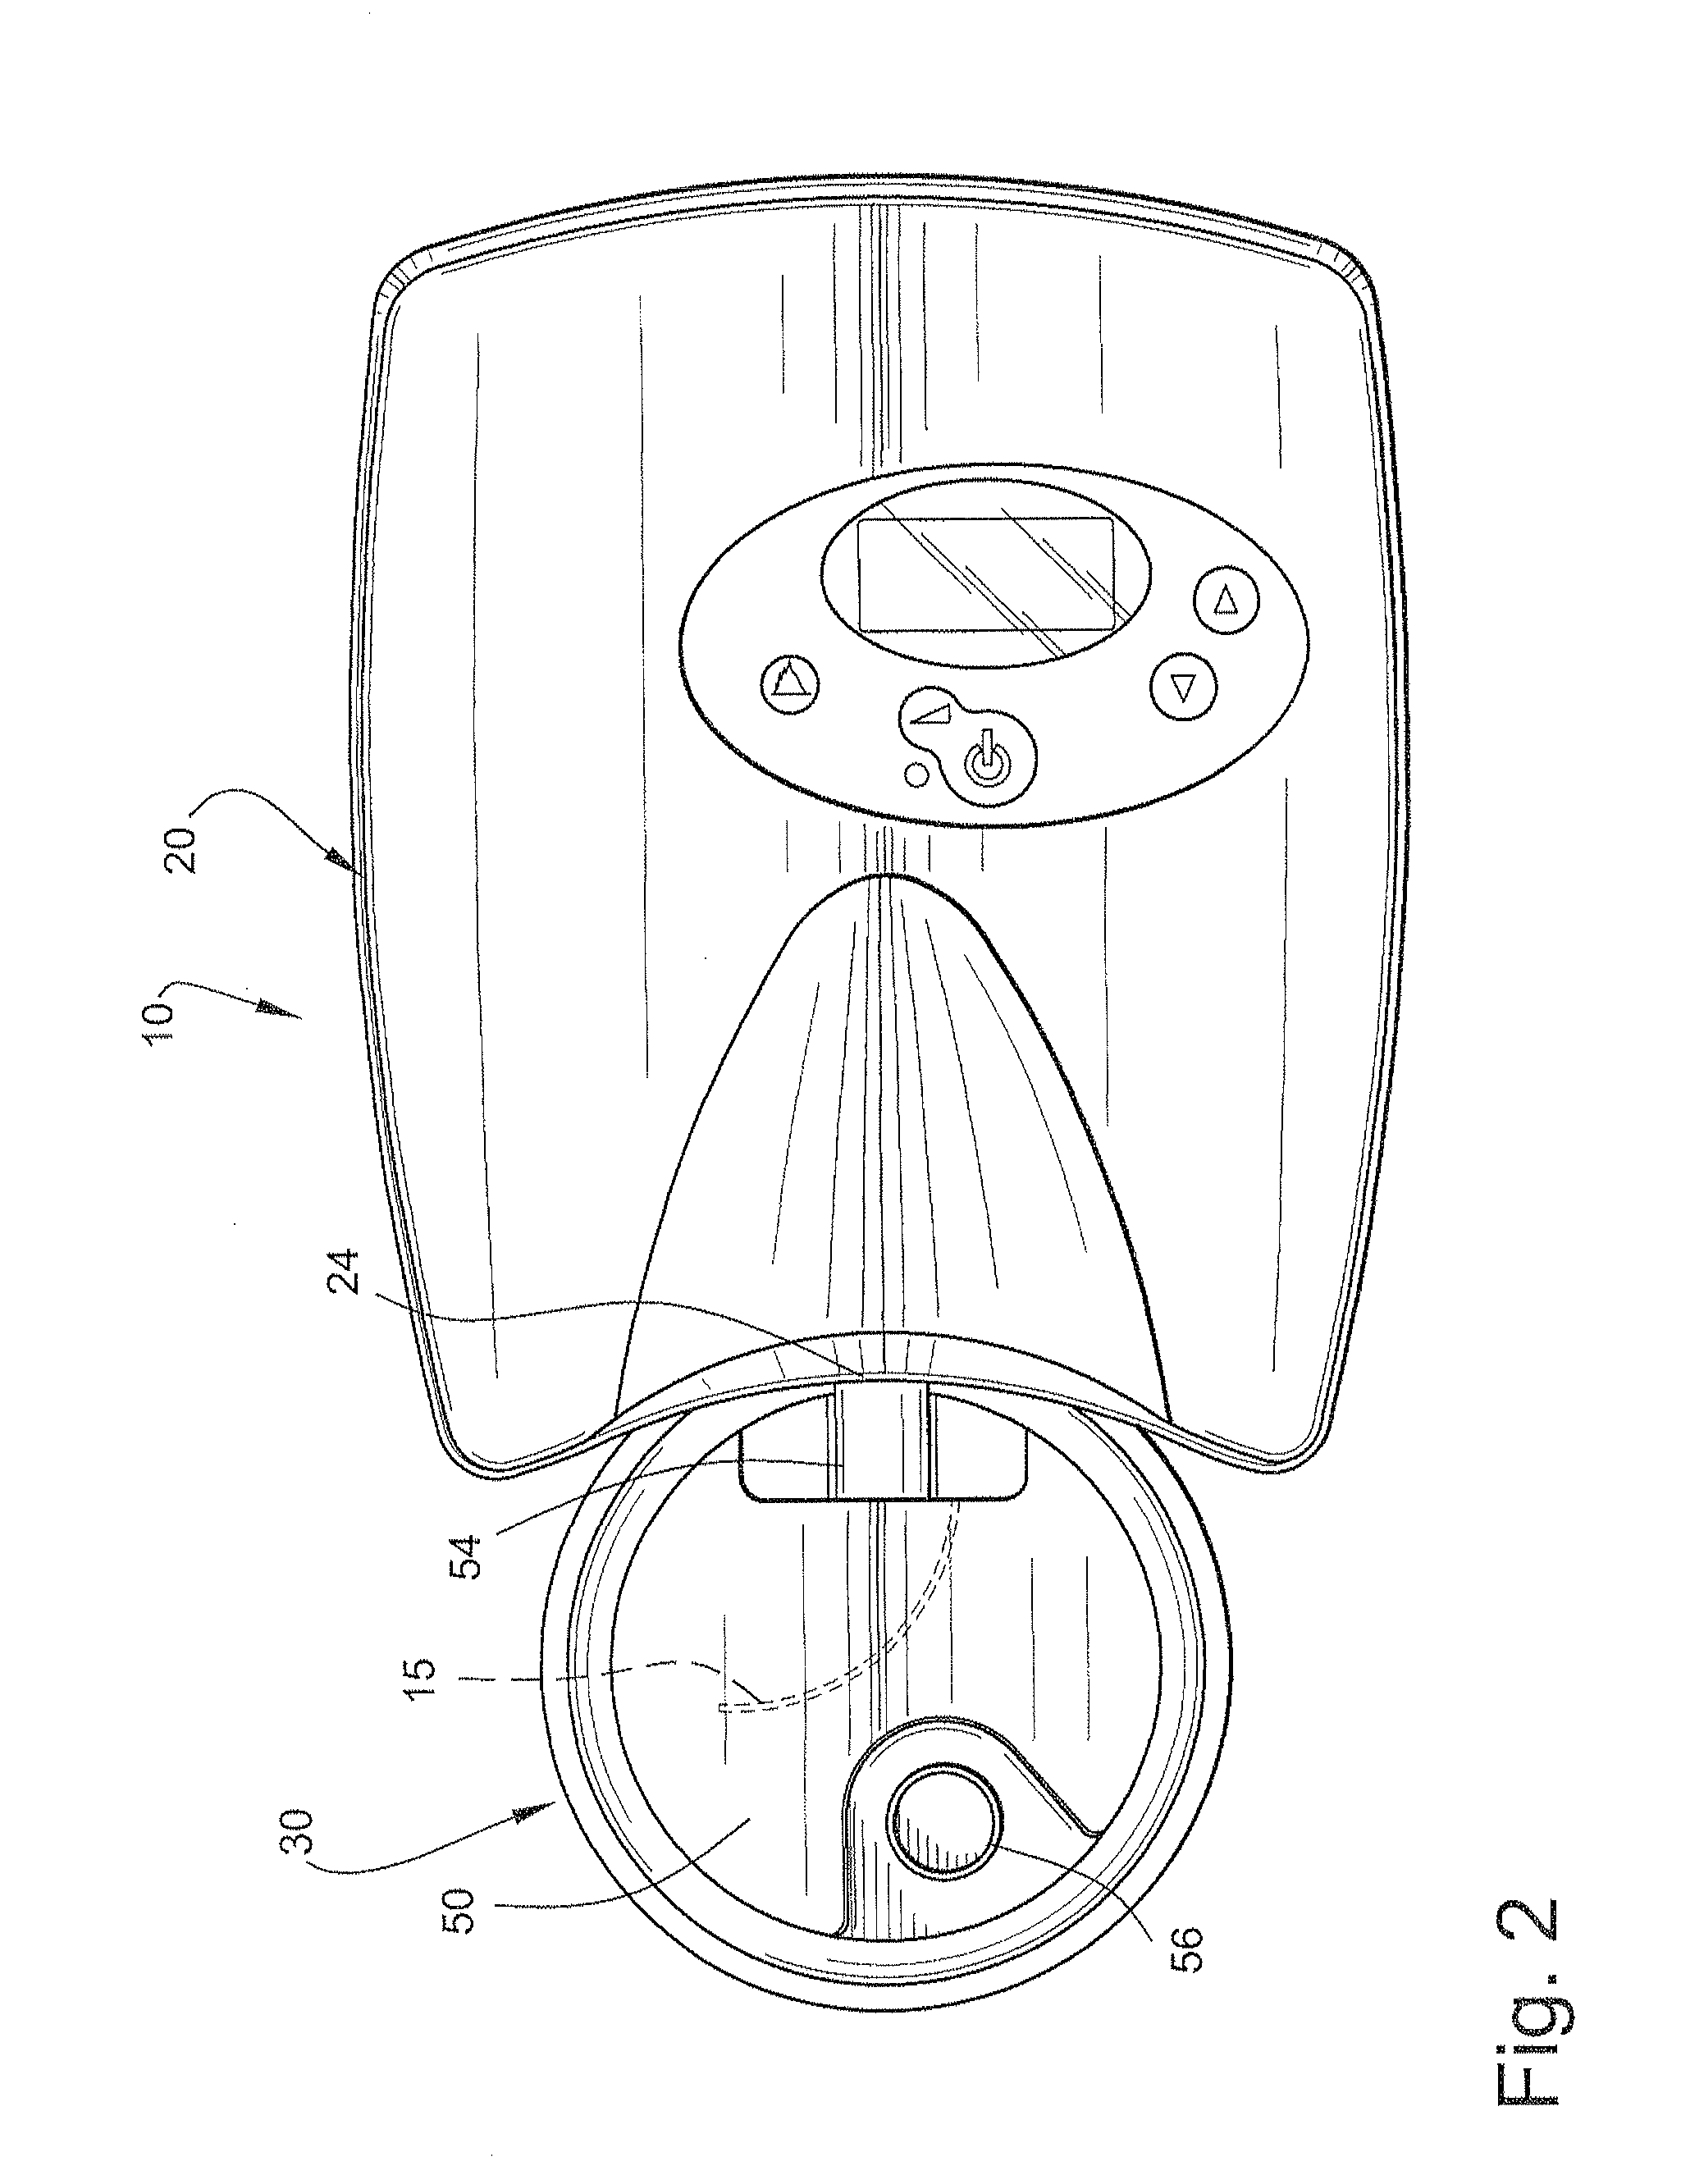 Humidifier and/or flow generator for cpap